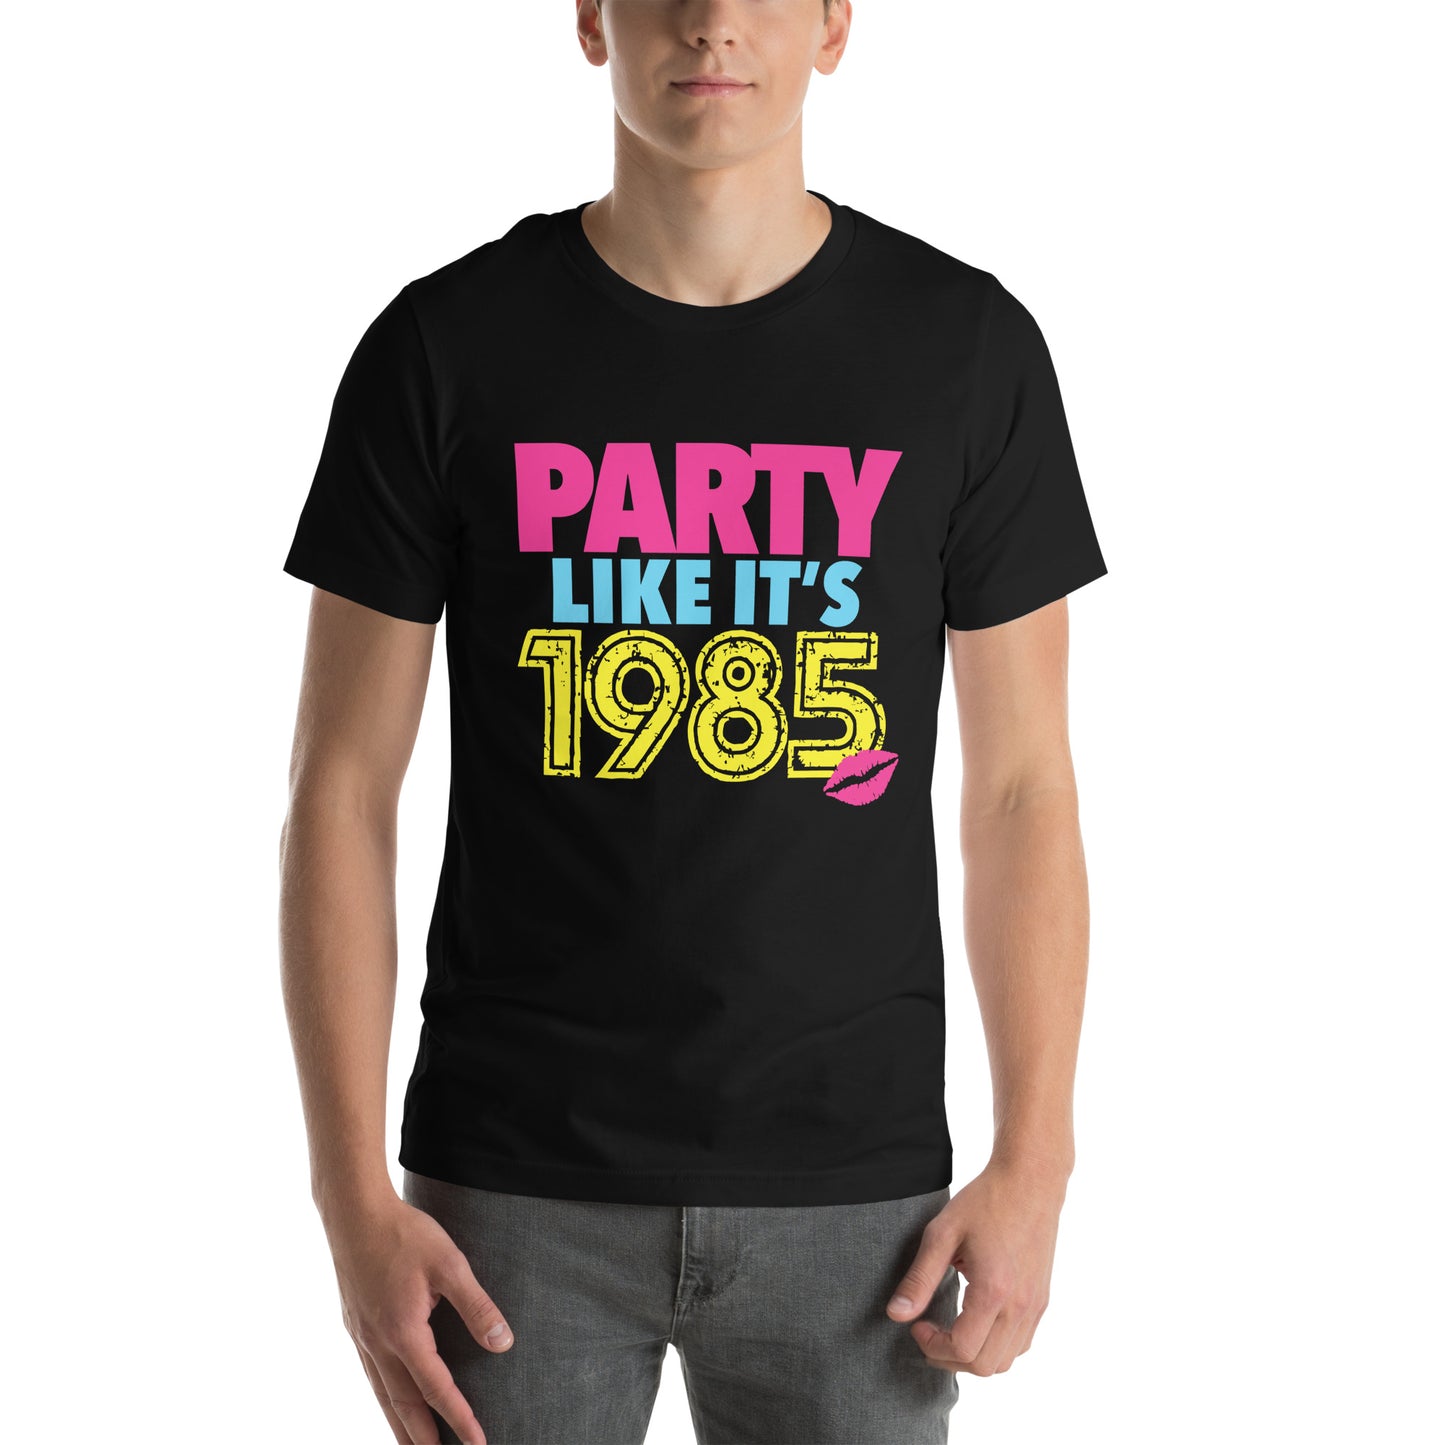 Party Like It's 1985 T-Shirt